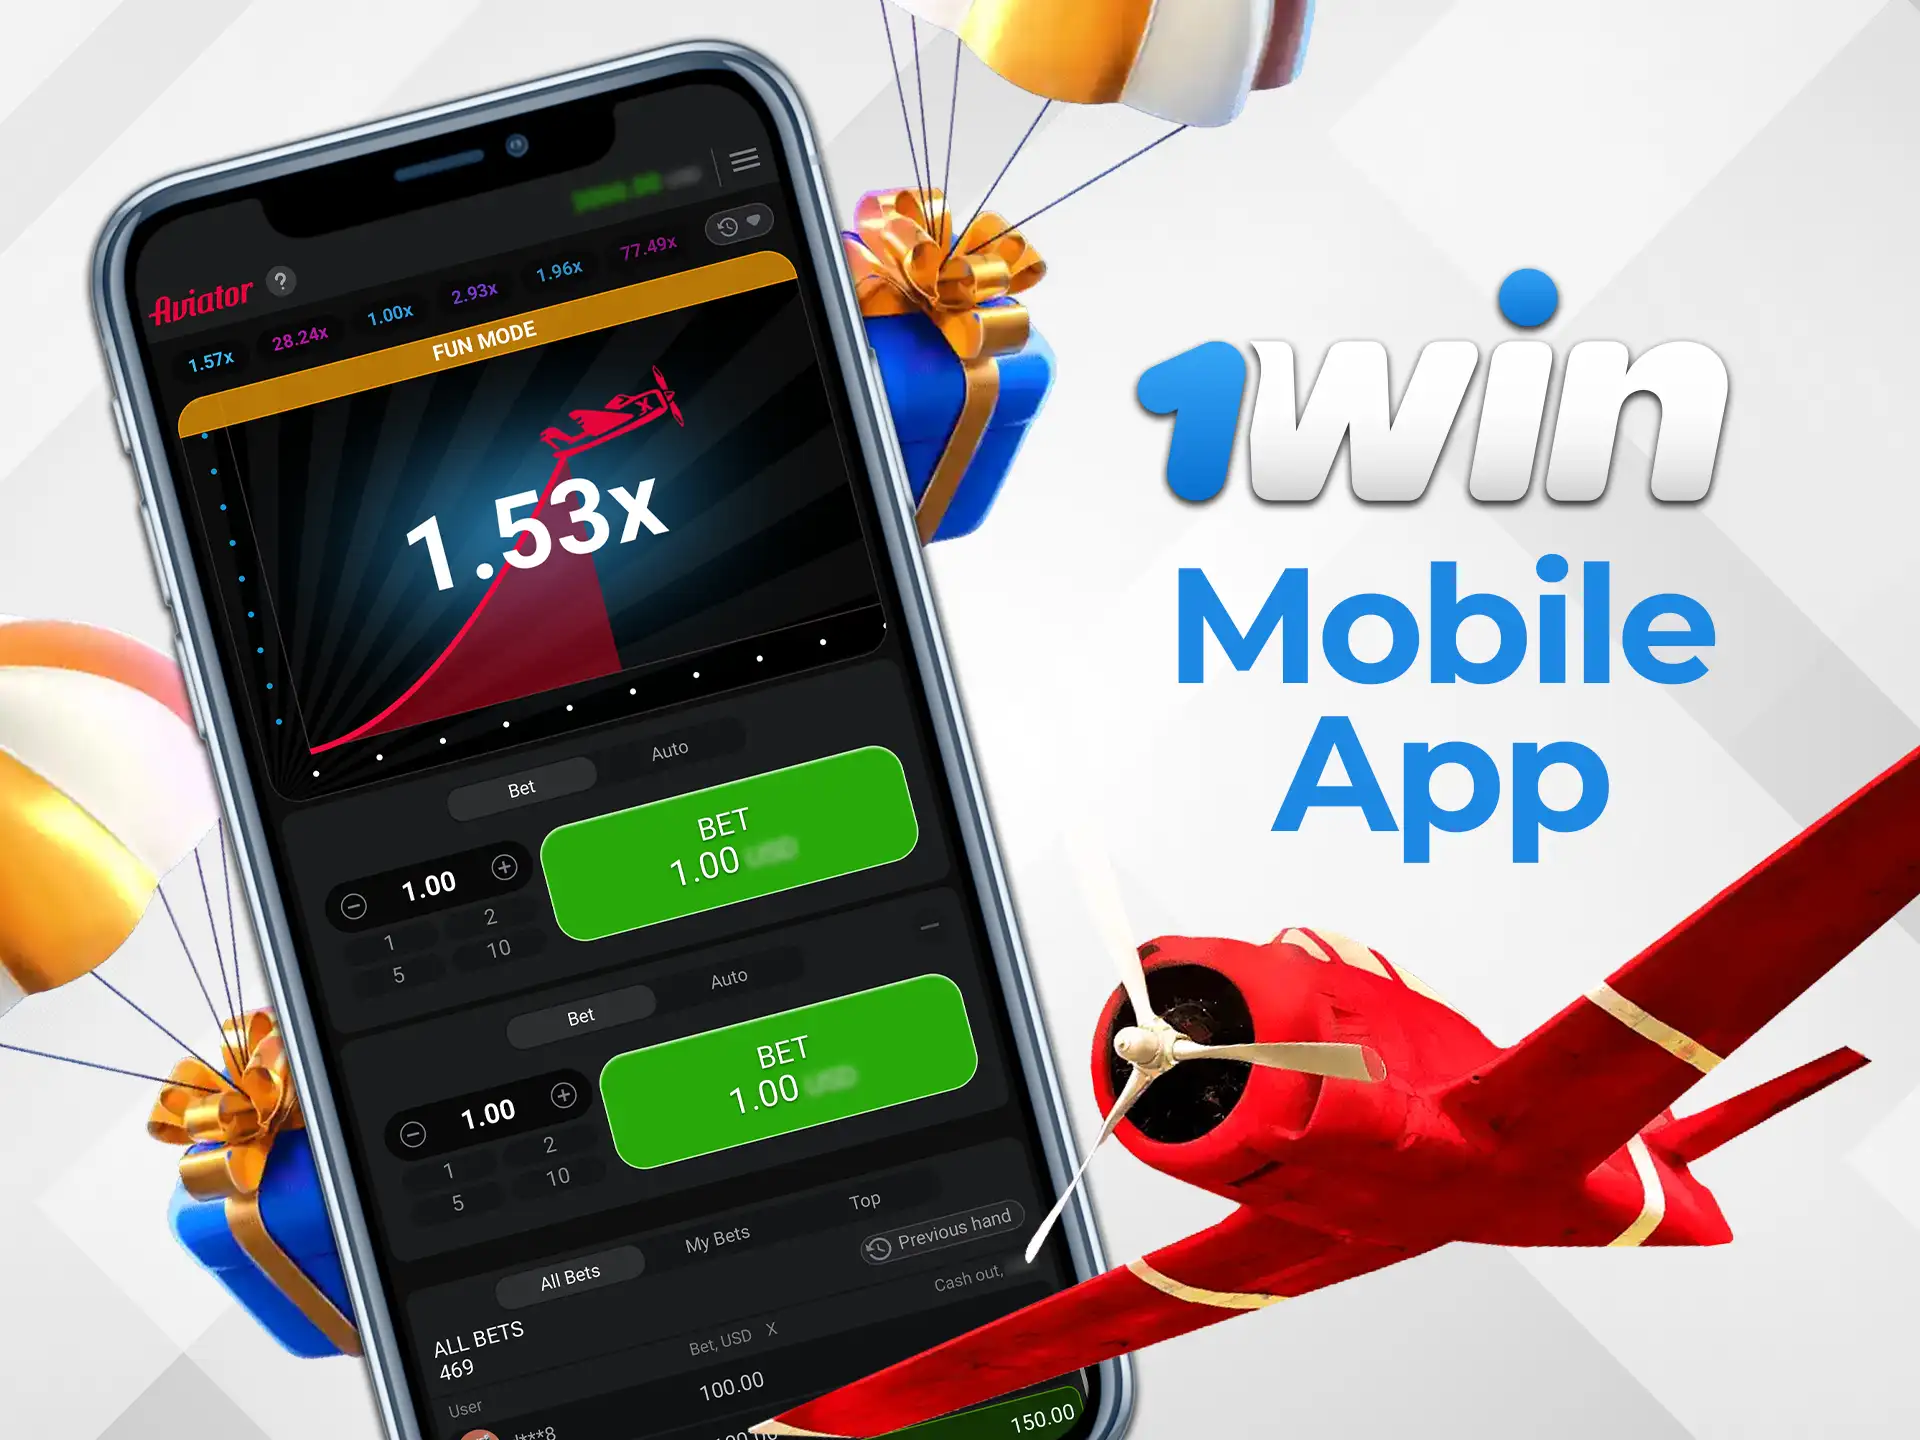 1Win Aviator is available in a web version for smartphones, and also in Android and iOS apps.